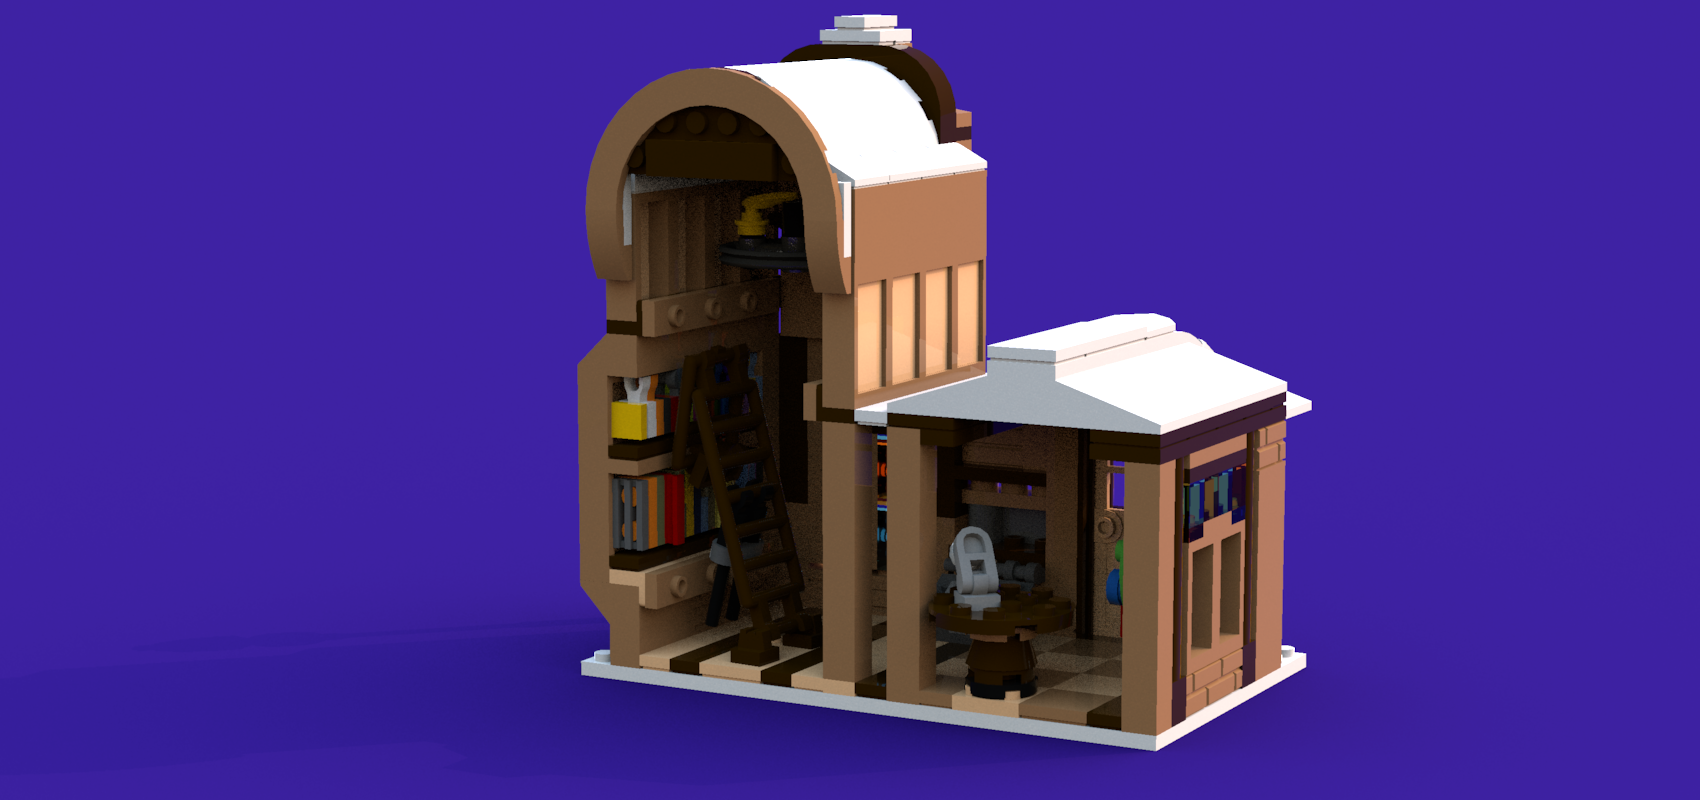 Winter Village Library Interior 3.lxf.png